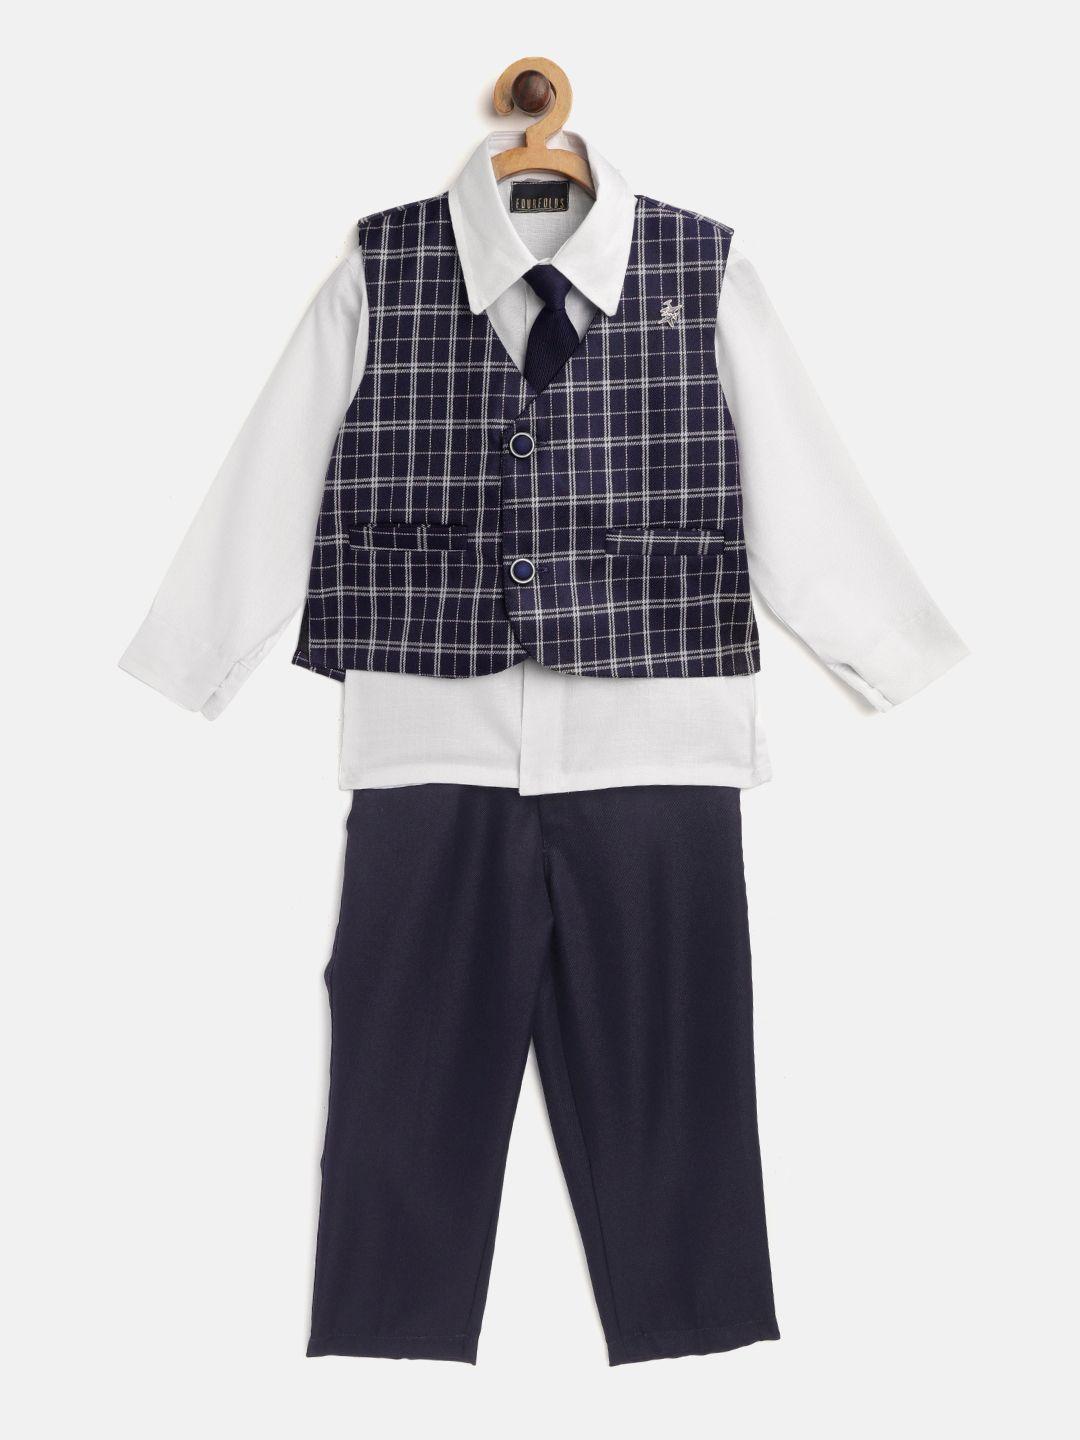 fourfolds boys white & navy blue solid clothing set with waistcoat & tie